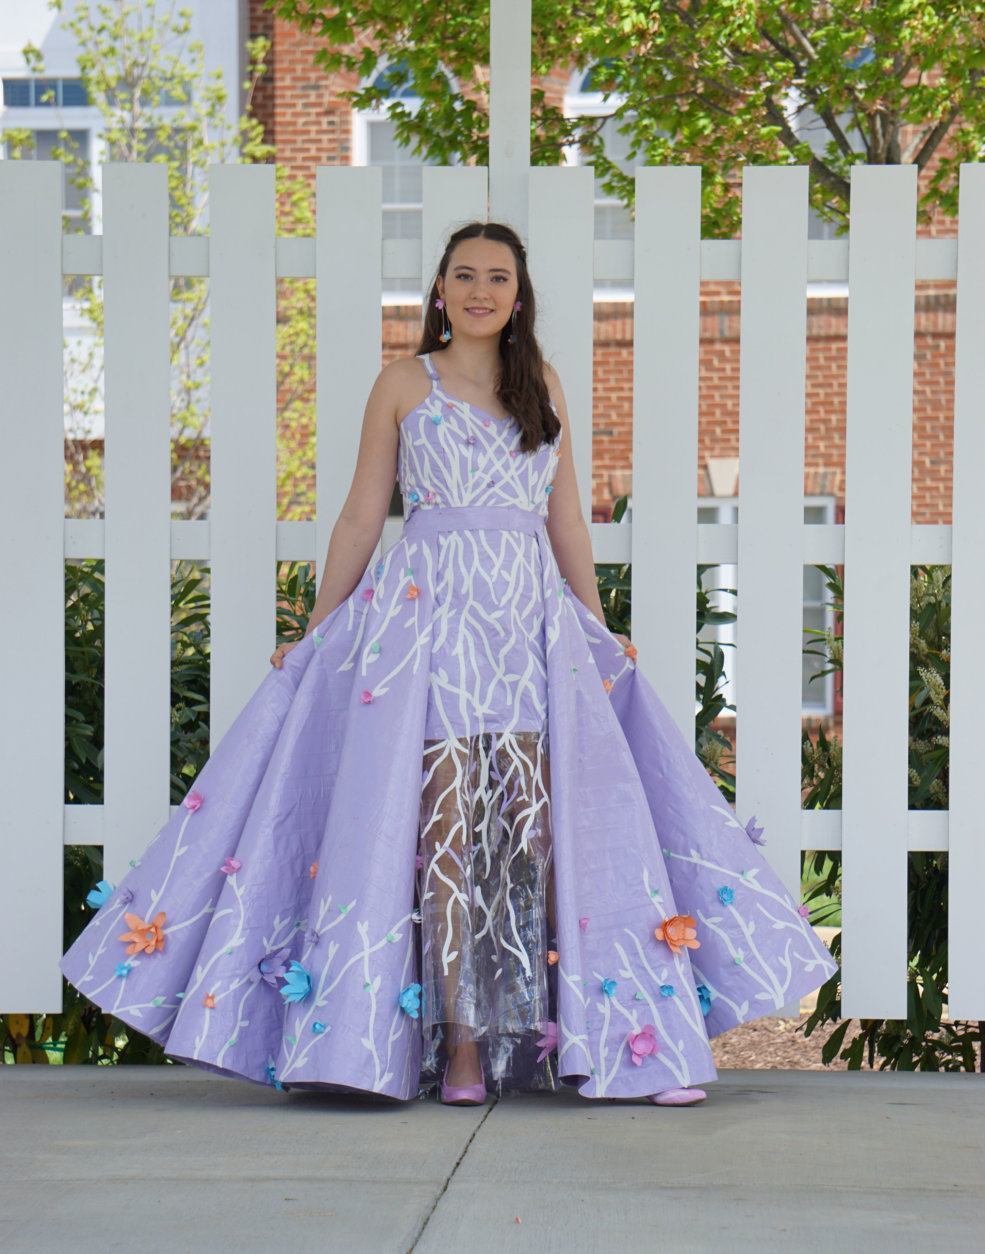 For the "Stuck at Prom" scholarship contest, Christina Mellott, 17, made this dress out of duct tape. The dress can transform into three different looks by changing and removing the overskirt. It took 80 hours and 36 rolls of duct tape. (Courtesy, Nicole Mellott)